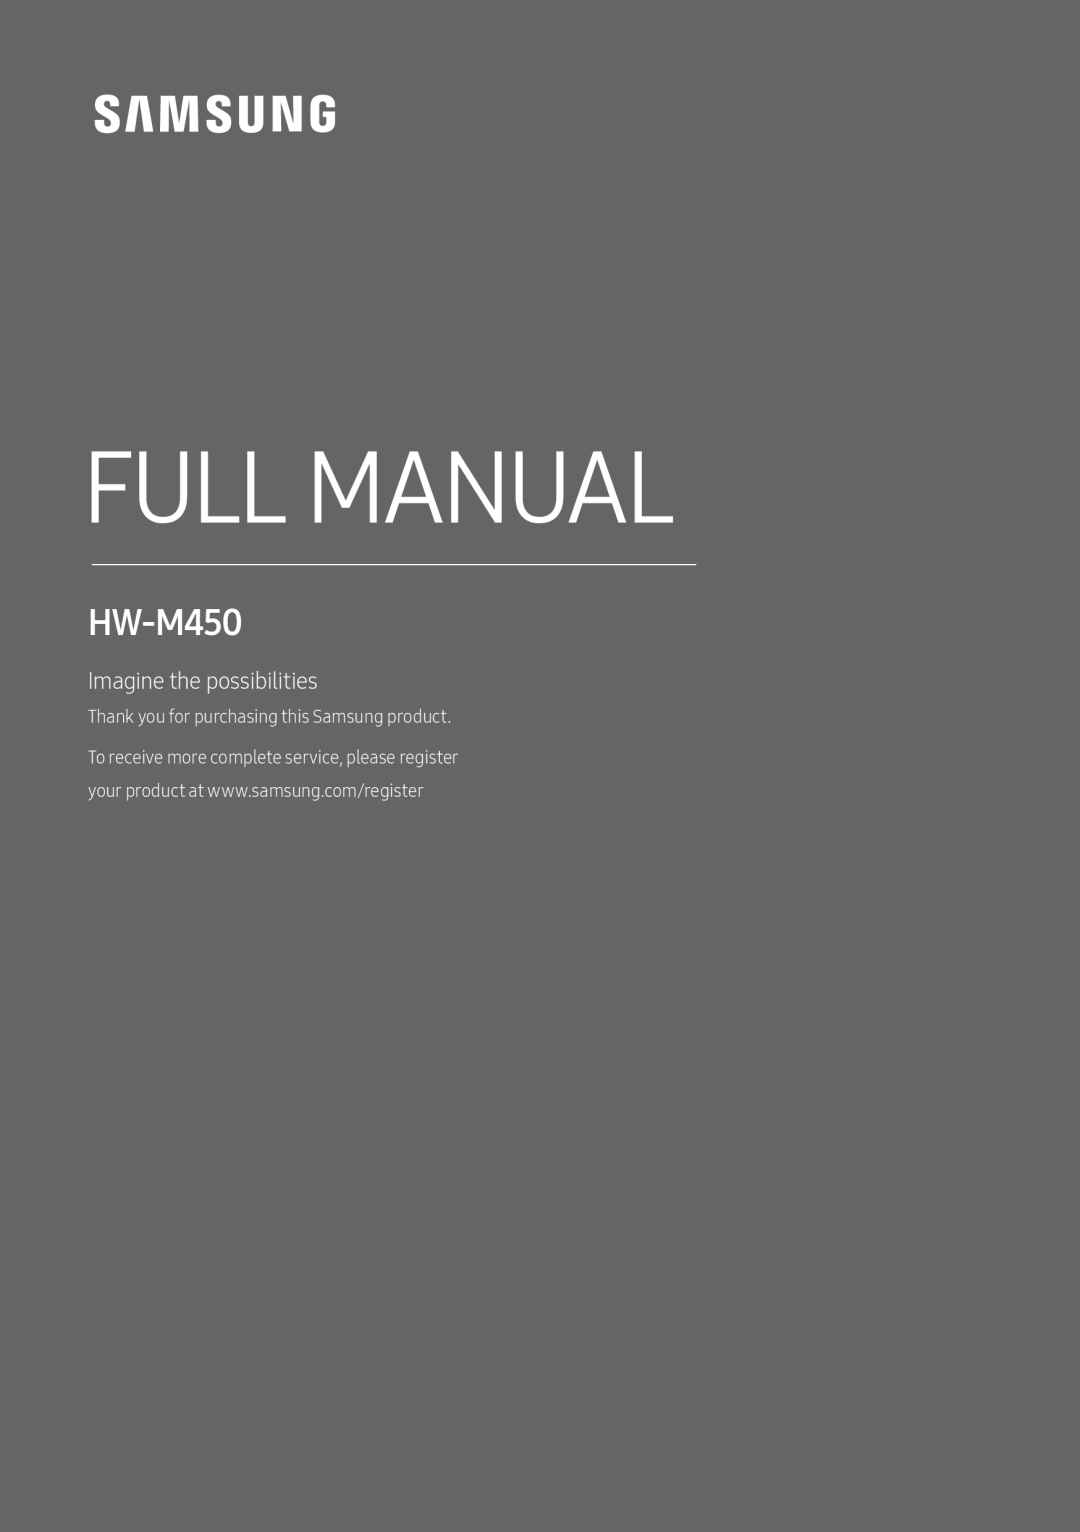 Samsung HW-M450/ZG manual Full Manual, Imagine the possibilities, Thank you for purchasing this Samsung product 